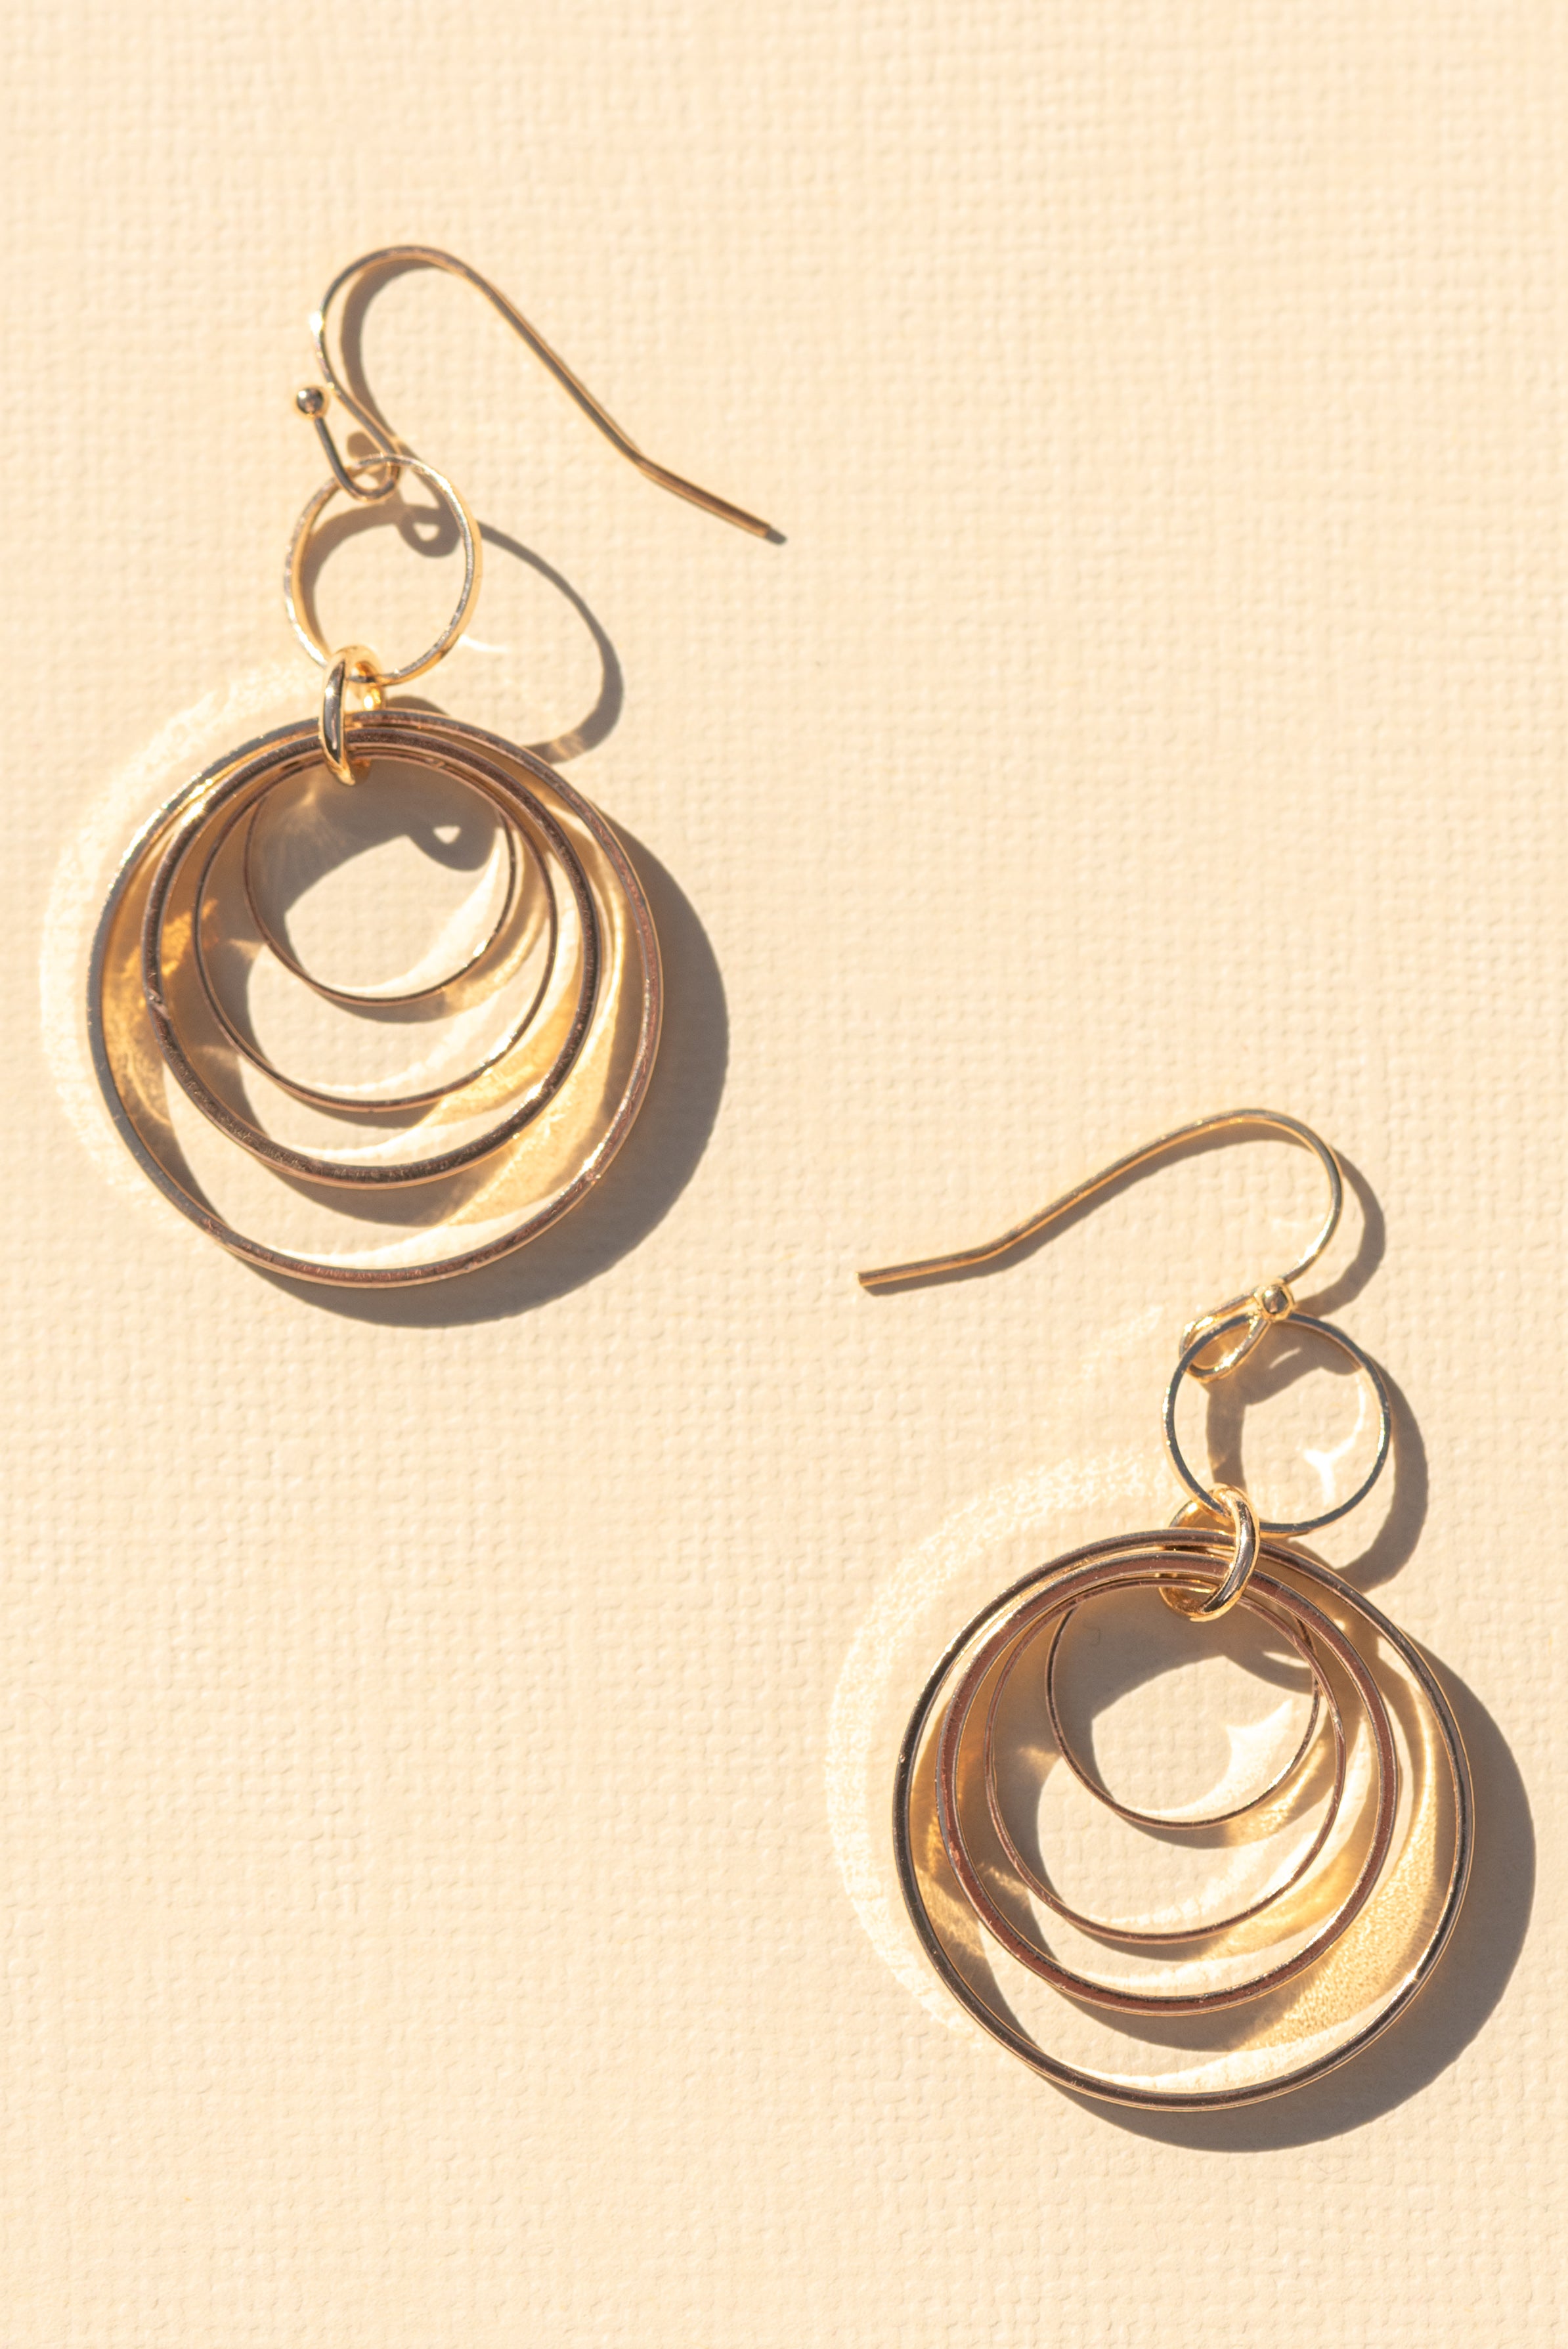 Type 1 Concentric Circles Earrings